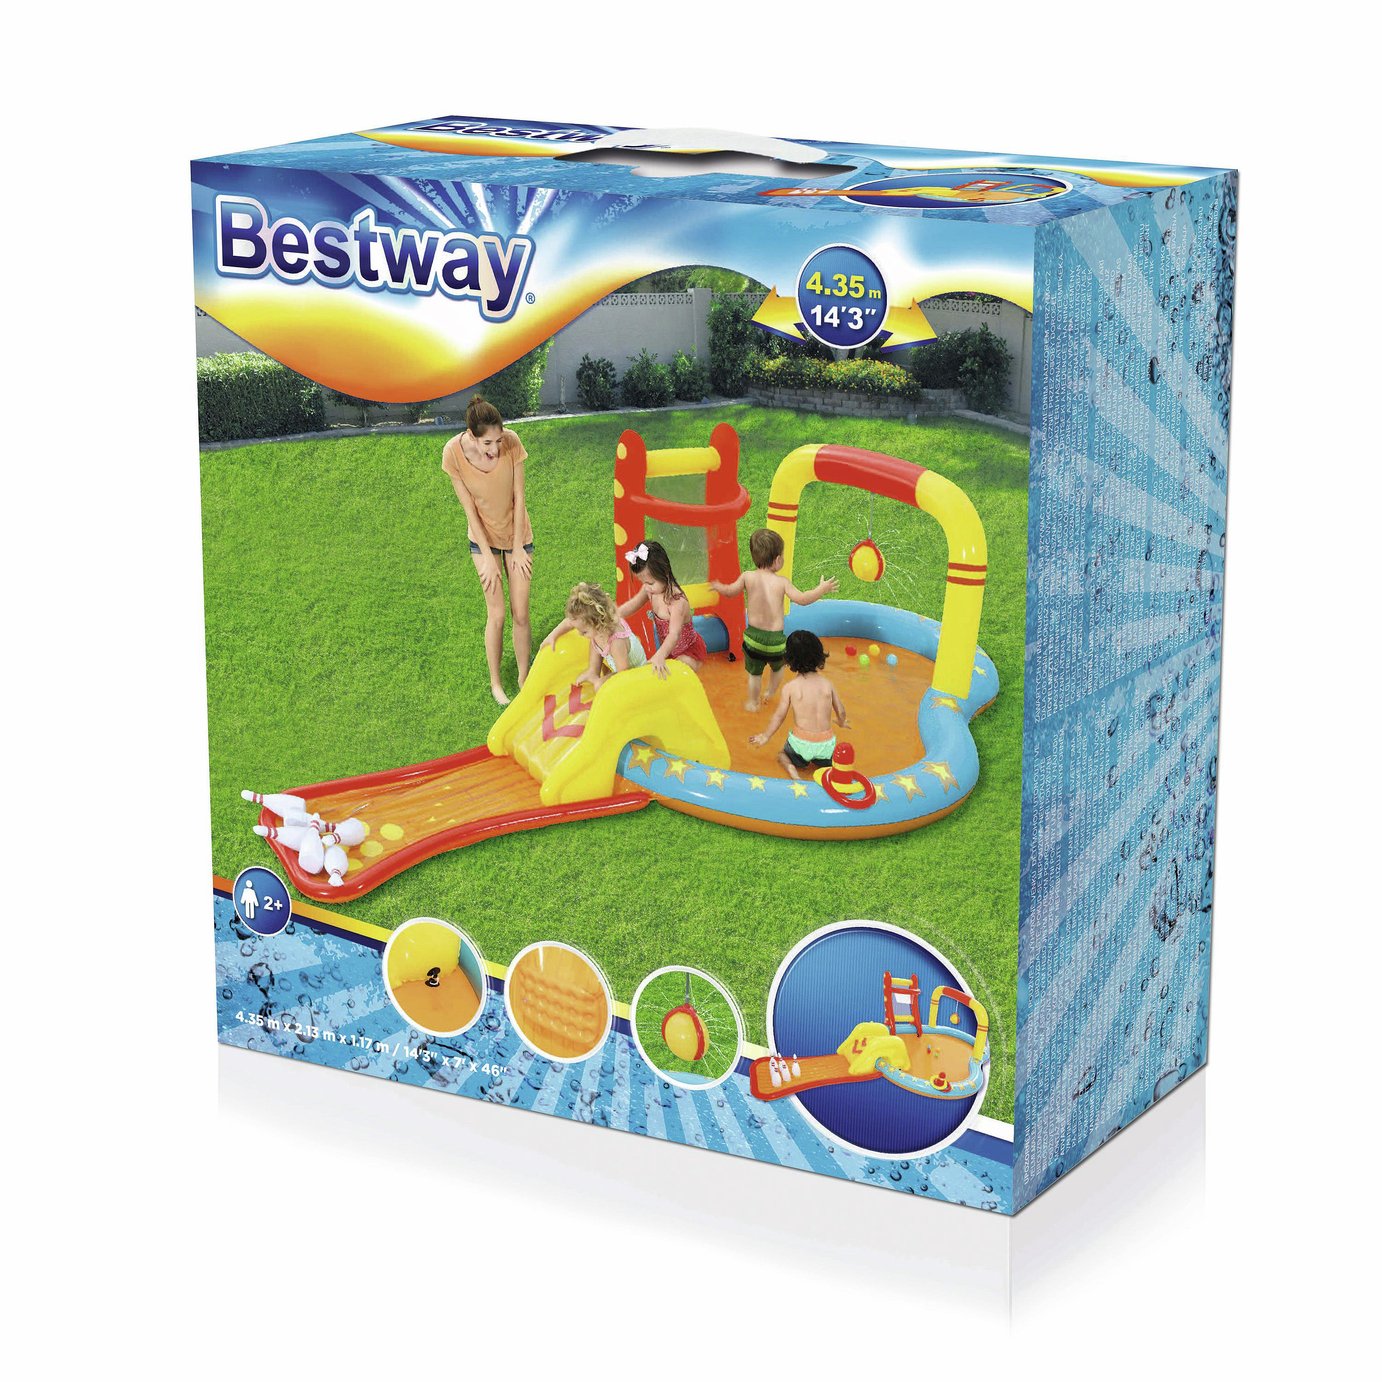 Bestway 14ft Lil Champ Play Centre Kids Paddling Pool Review